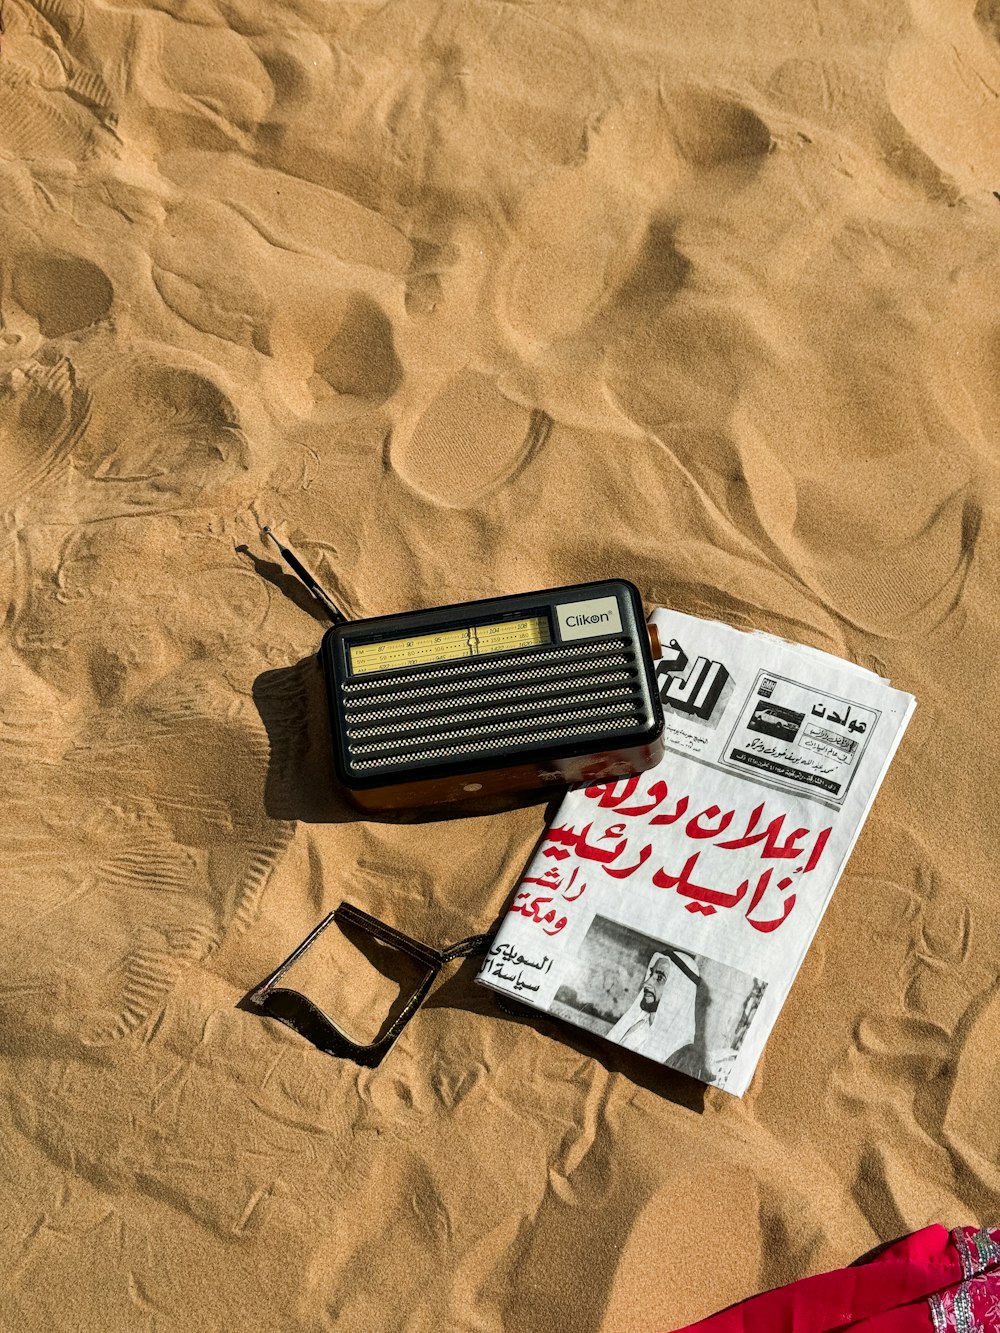 a radio and a pair of sunglasses laying in the sand